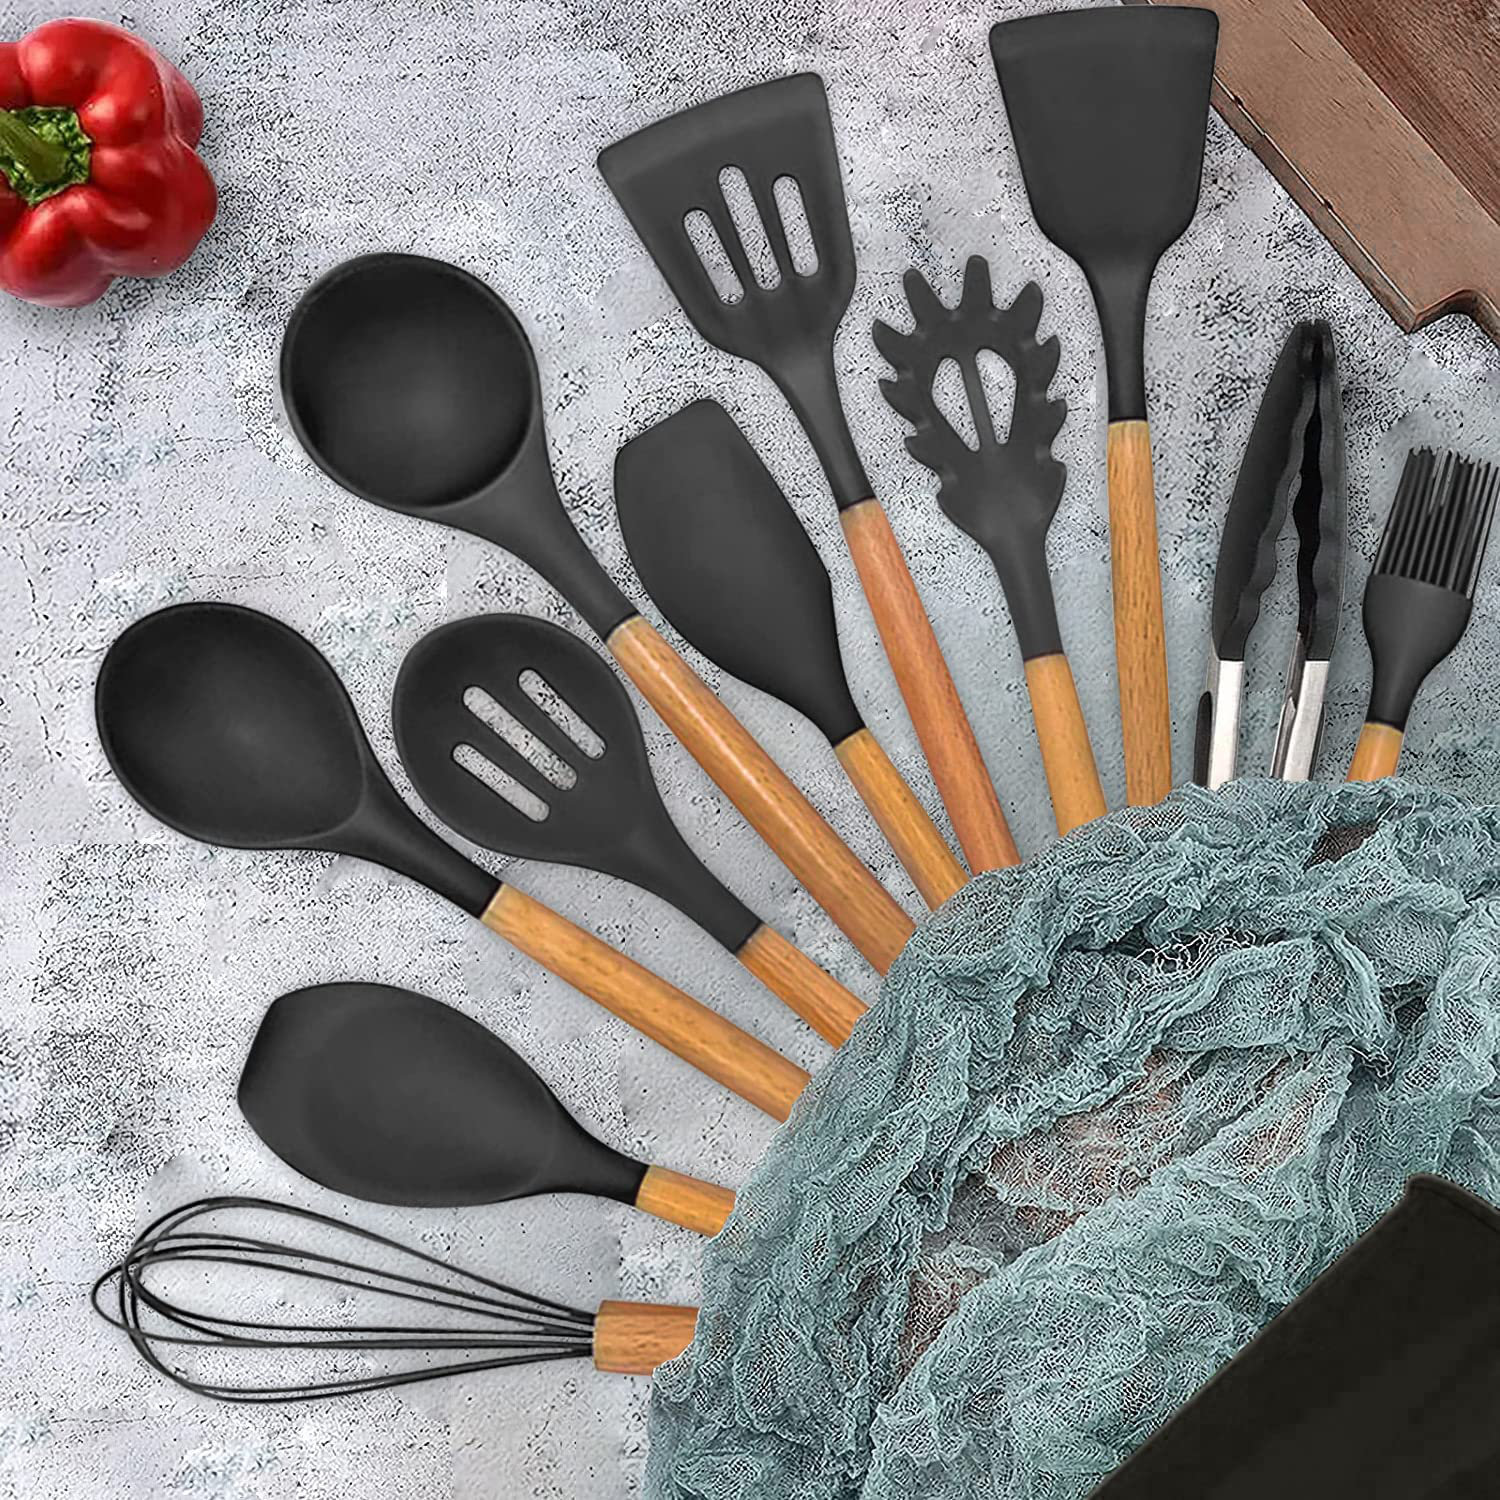 12-Piece Silicone Kitchen Cooking Utensils Set with Holder, Wooden Handle Utensils for Cooking, Kitchen Tools Include Spatula Turner Spoons Soup Ladle